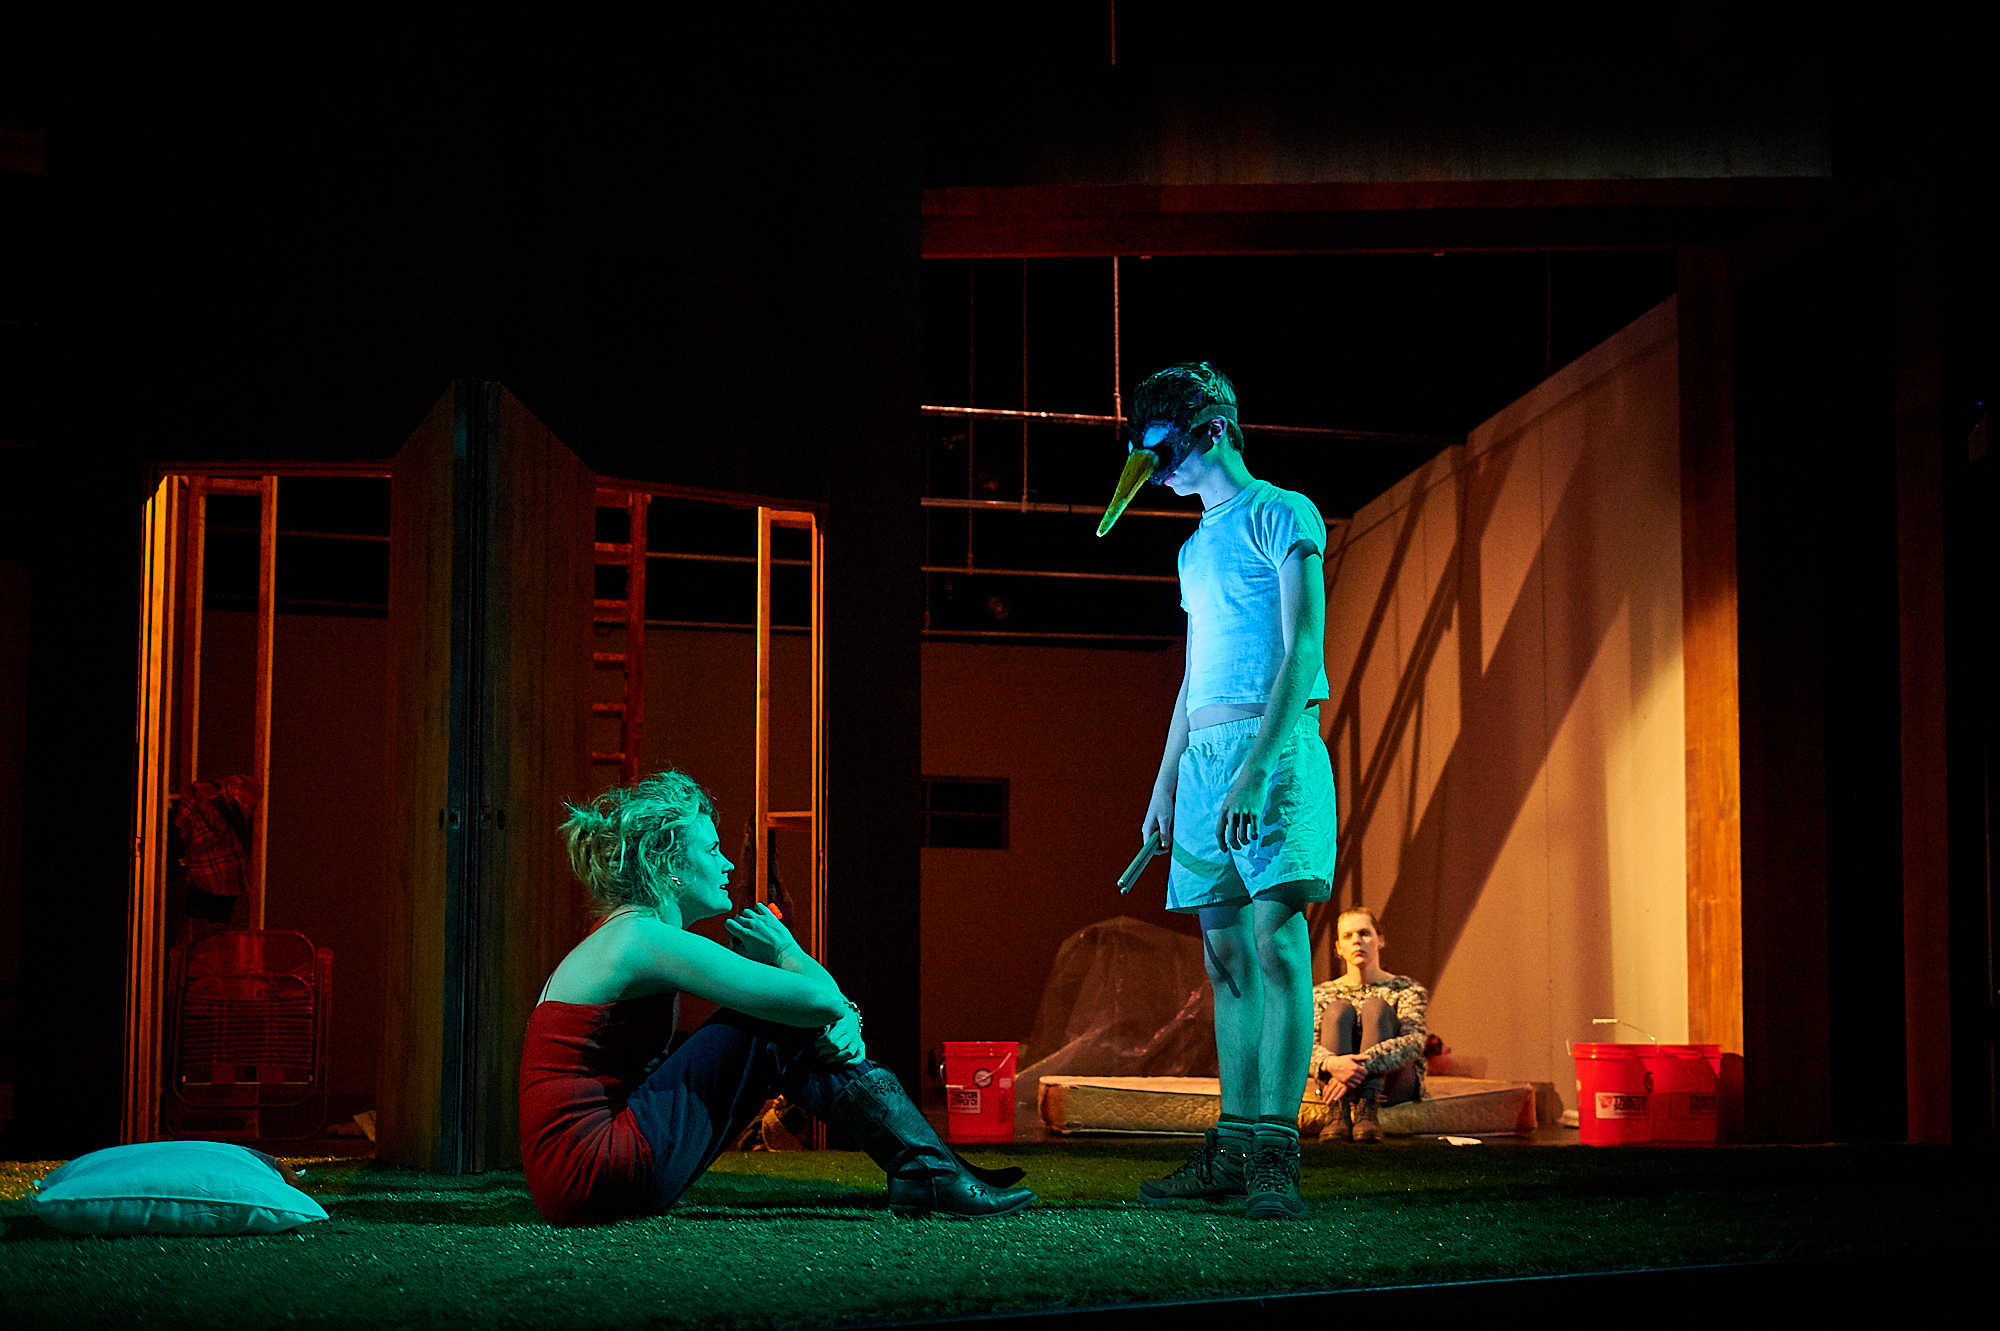  Colgate University theater students perform the spring production of A Map of Virtue, an Obbie award winning play by Erin Courtney. Directed by April Sweeney, Scenic and Costume Design by Anya Klepikov, Sound Design by Mike Weiss, Lighting Design by